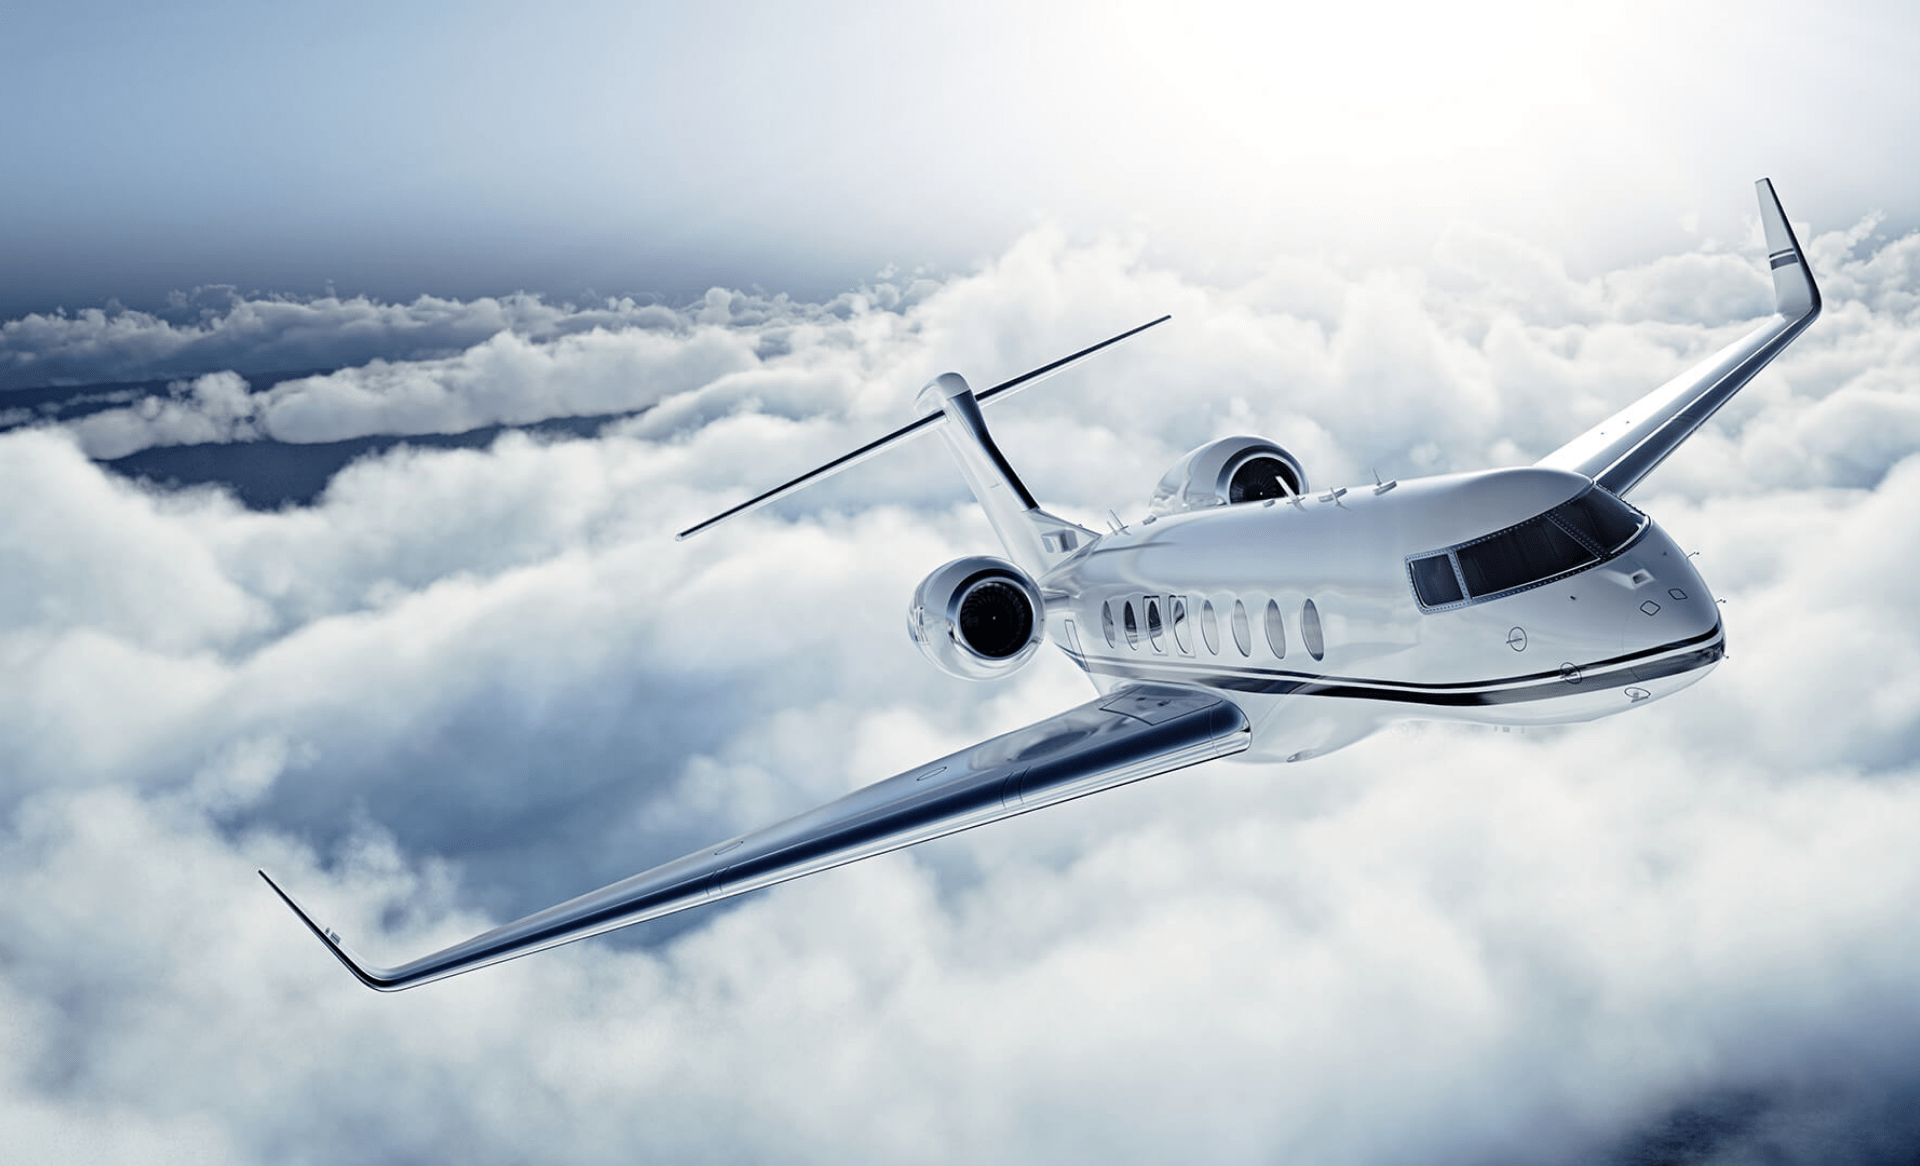 How much does it cost to rent a private jet?